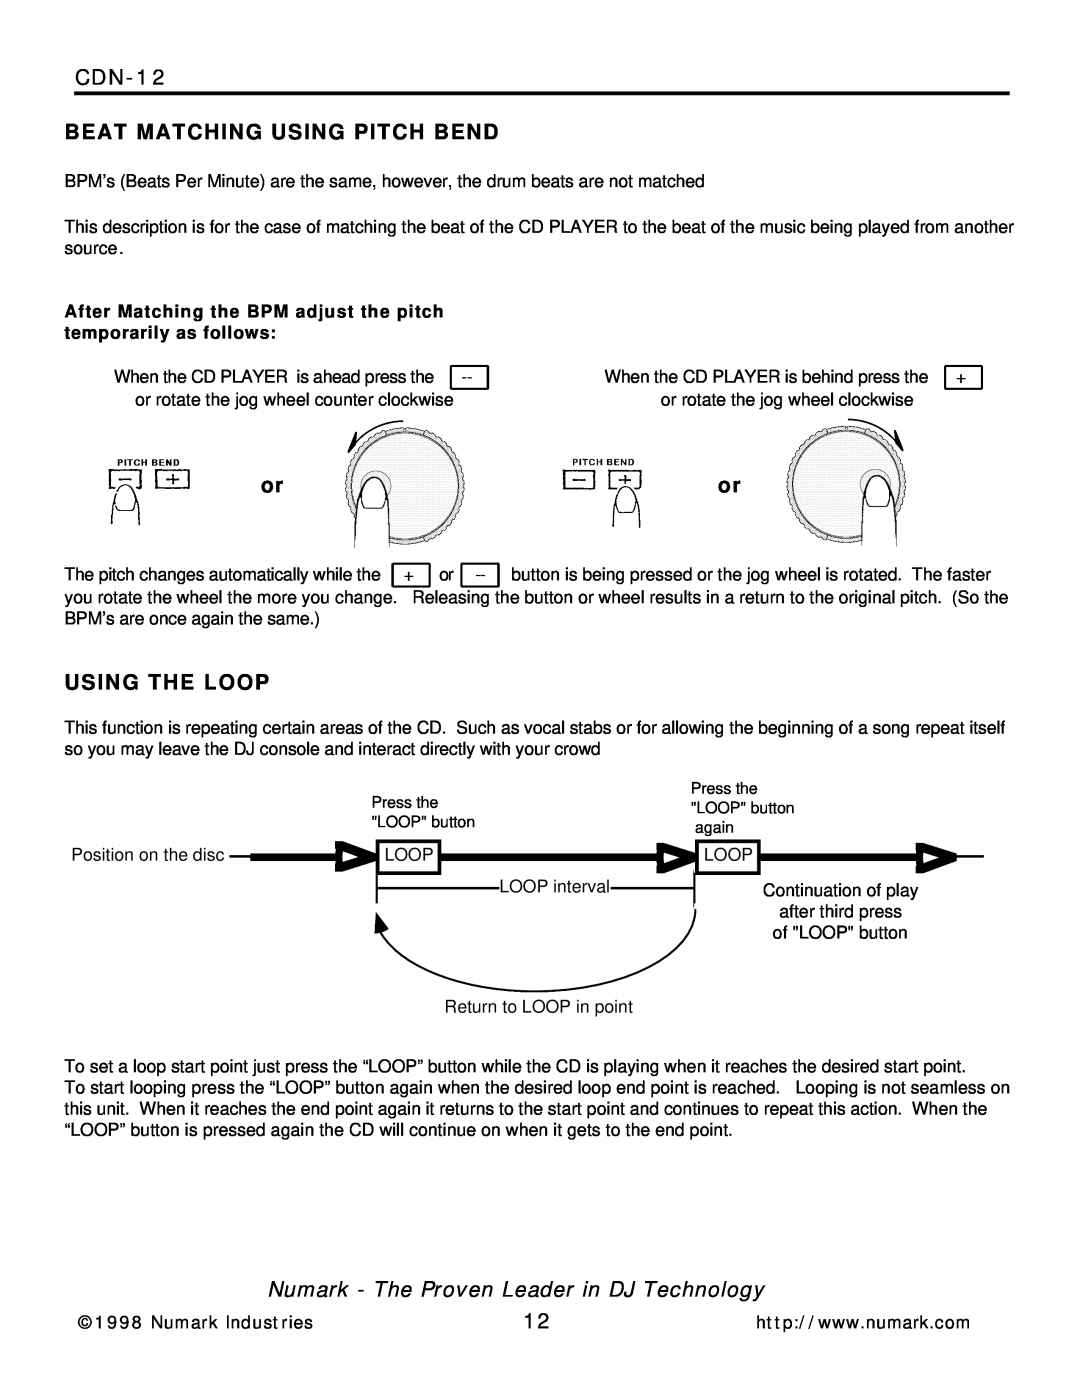 Numark Industries CDN-12 manual Beat Matching Using Pitch Bend, Using The Loop, Numark - The Proven Leader in DJ Technology 